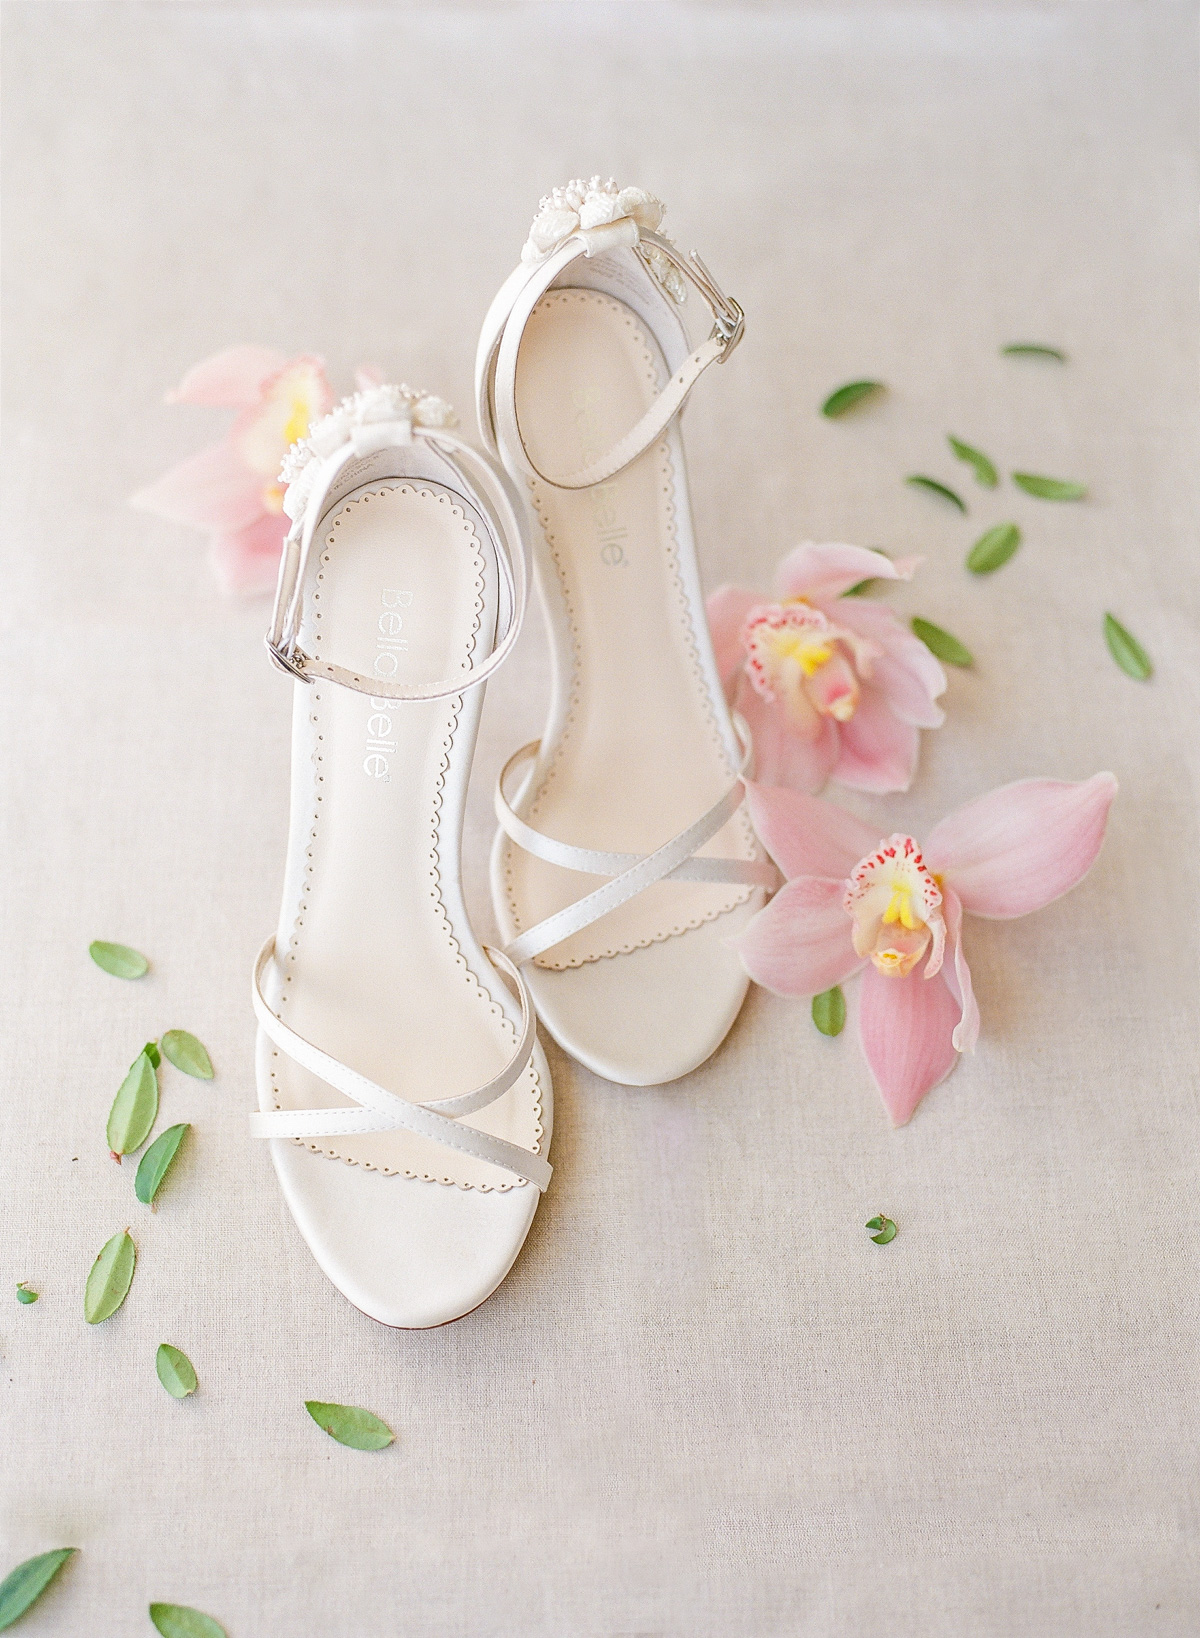 strappy wedding heels by bella belle shoes